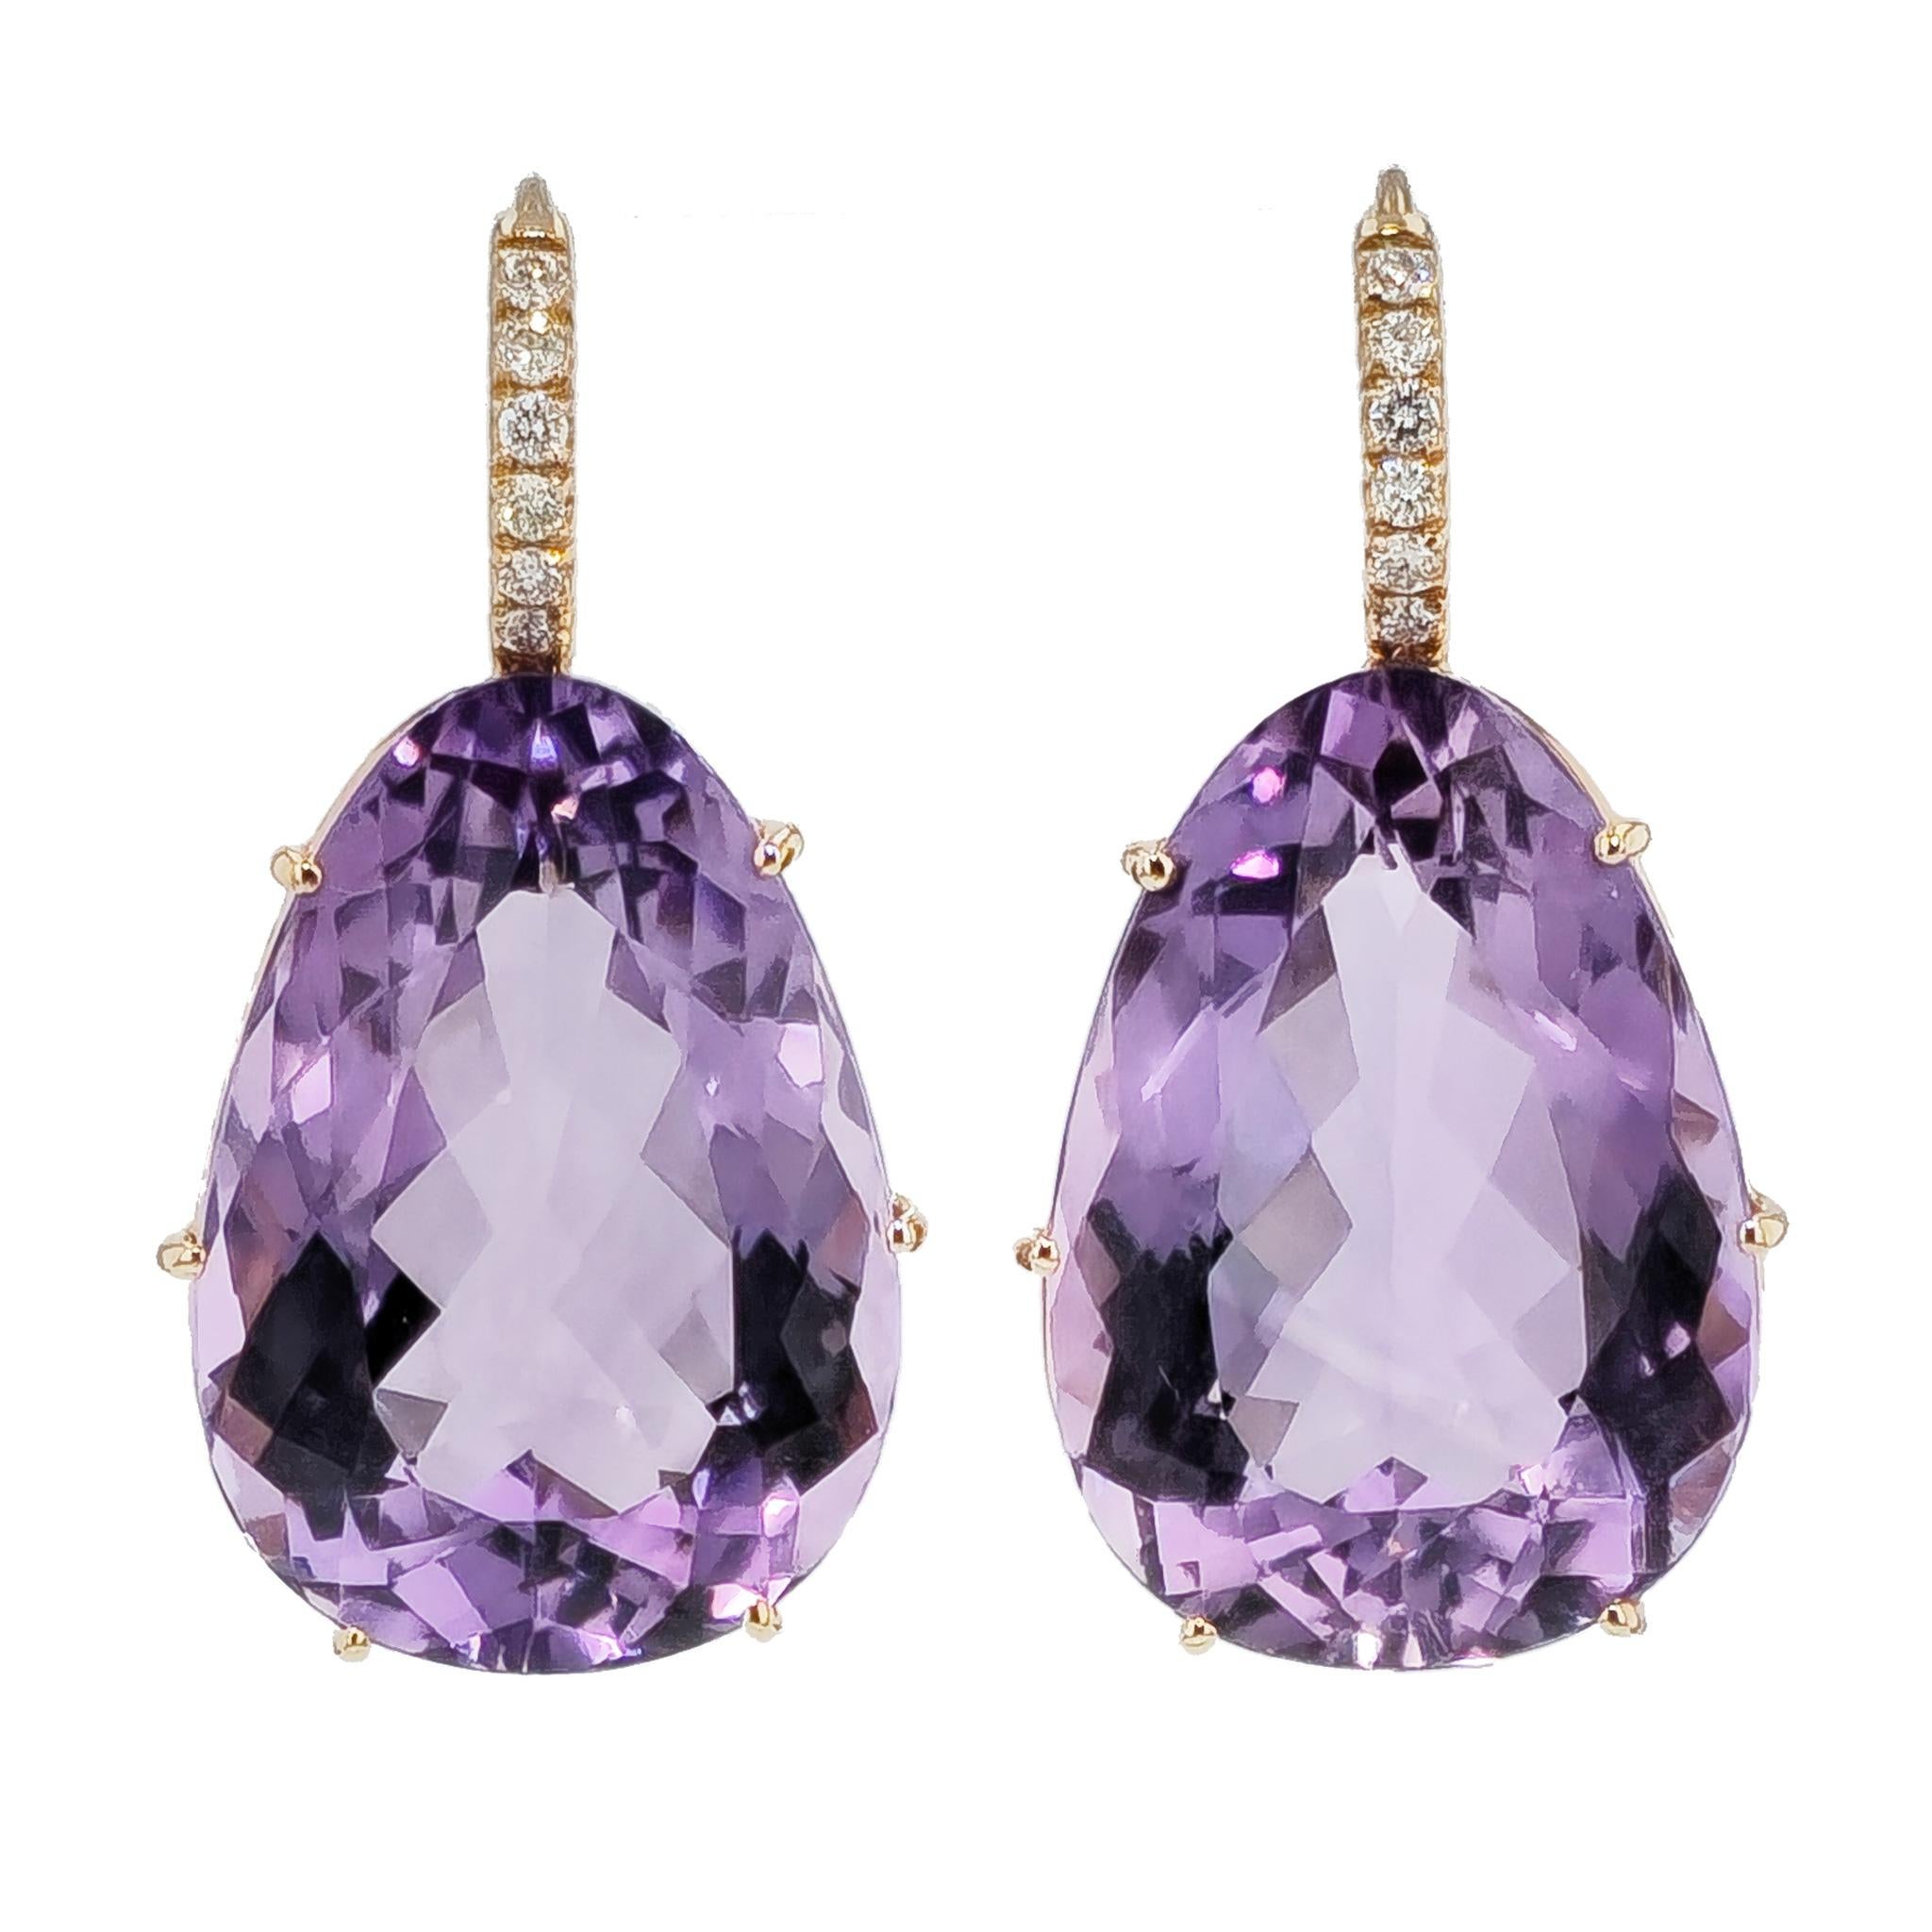 Introducing our exquisite amethyst and diamond pave drop earrings. These are a true treasure from our exclusive handmade collection. 

Crafted with passion, these earrings boast 48.15 carat high quality amethyst drops that radiate with enchanting